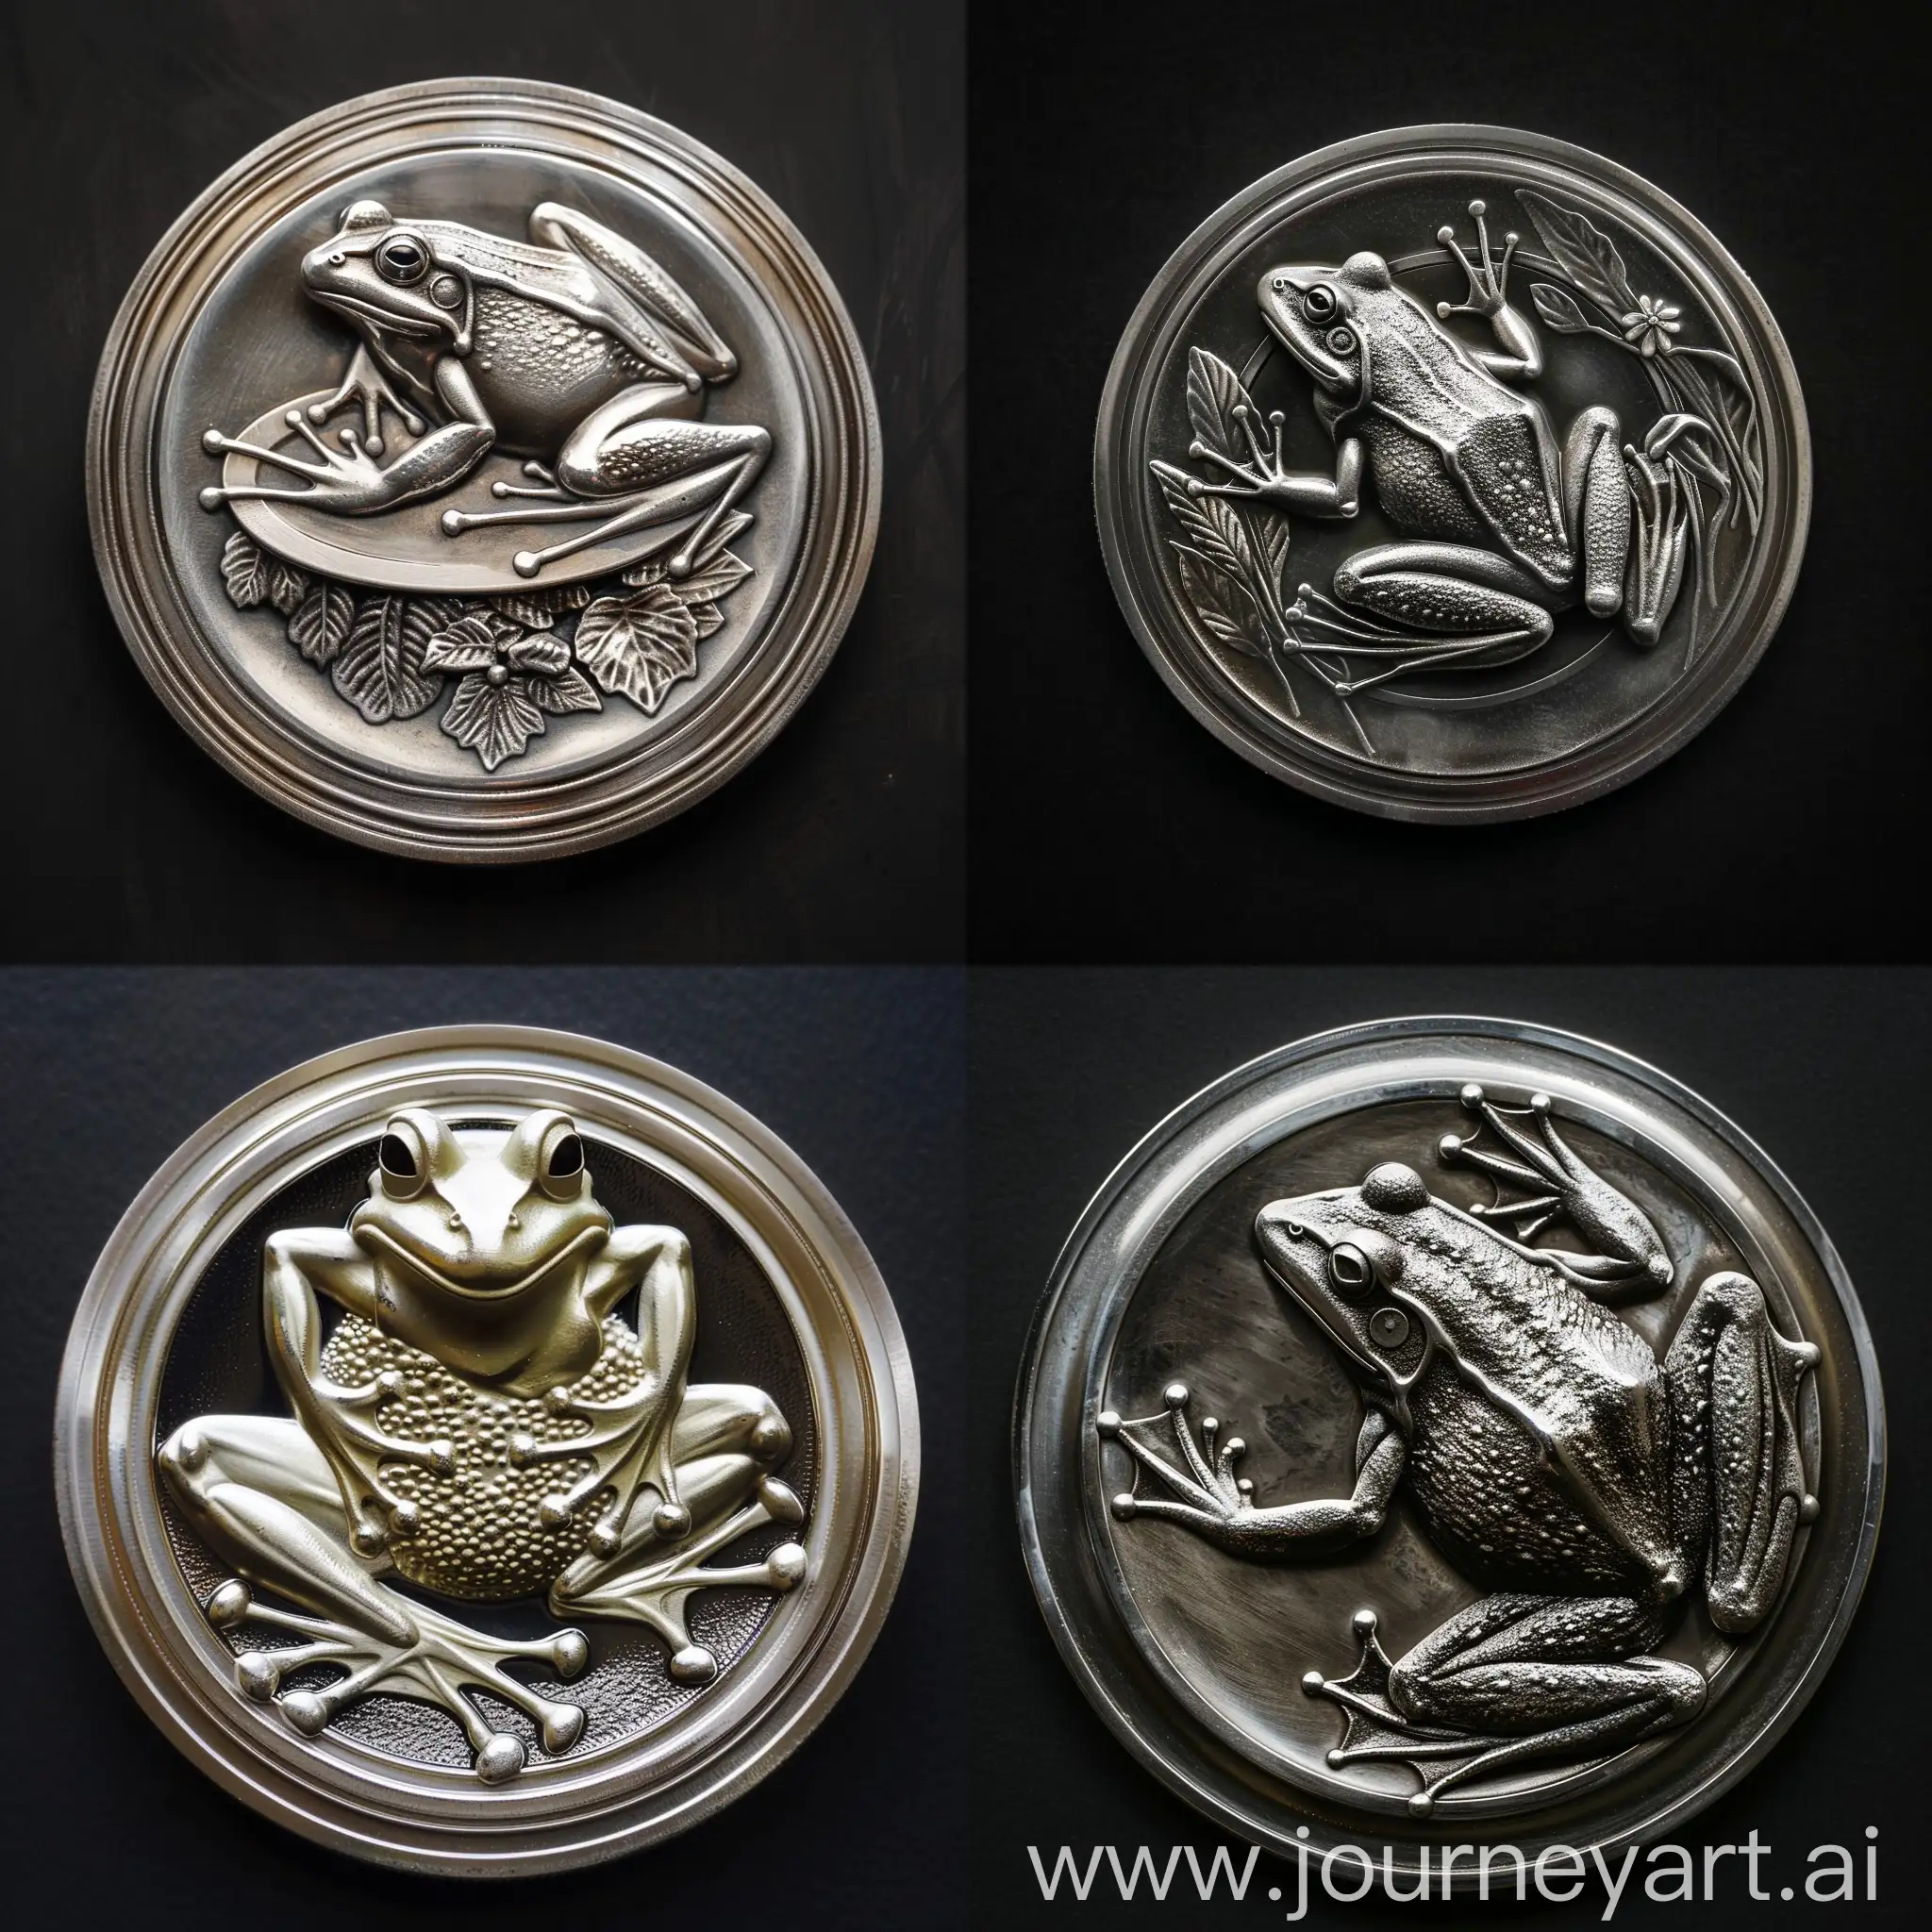 Silver Coin effigy in the form of frog on dinner plate, circular format, black background, bas relief